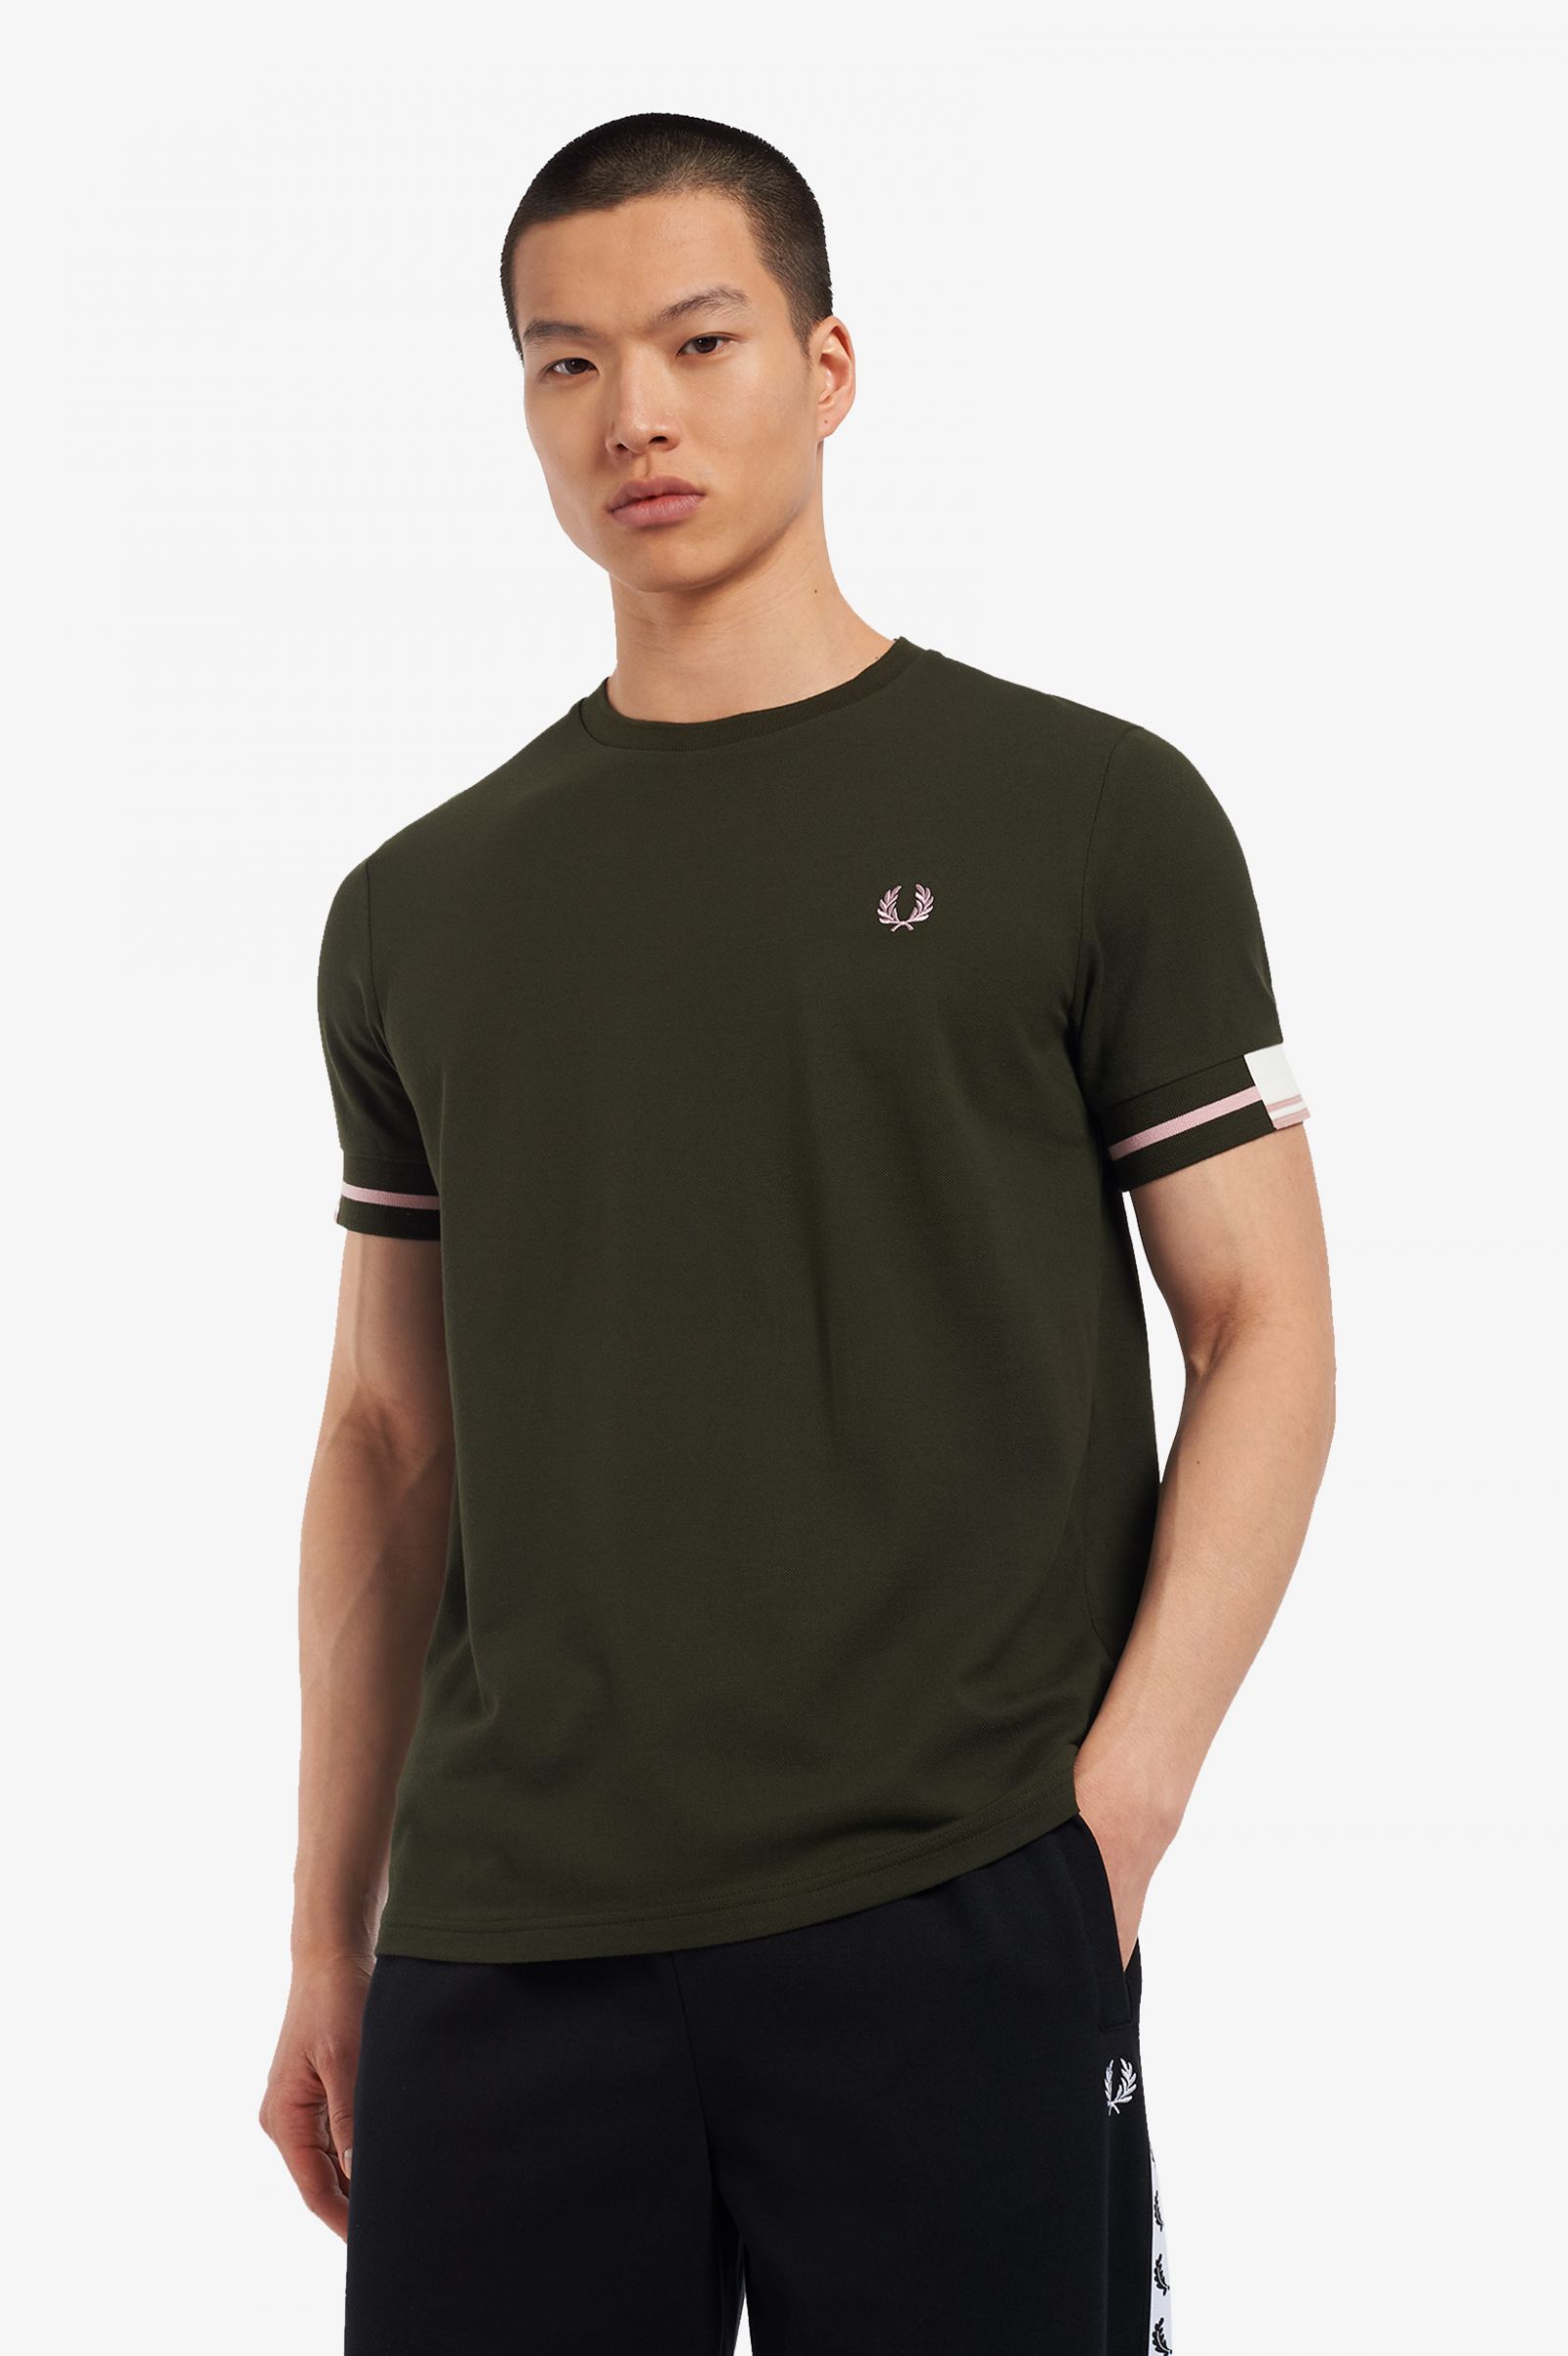 CAMISETA FRED PERRY HUNTING GREEN